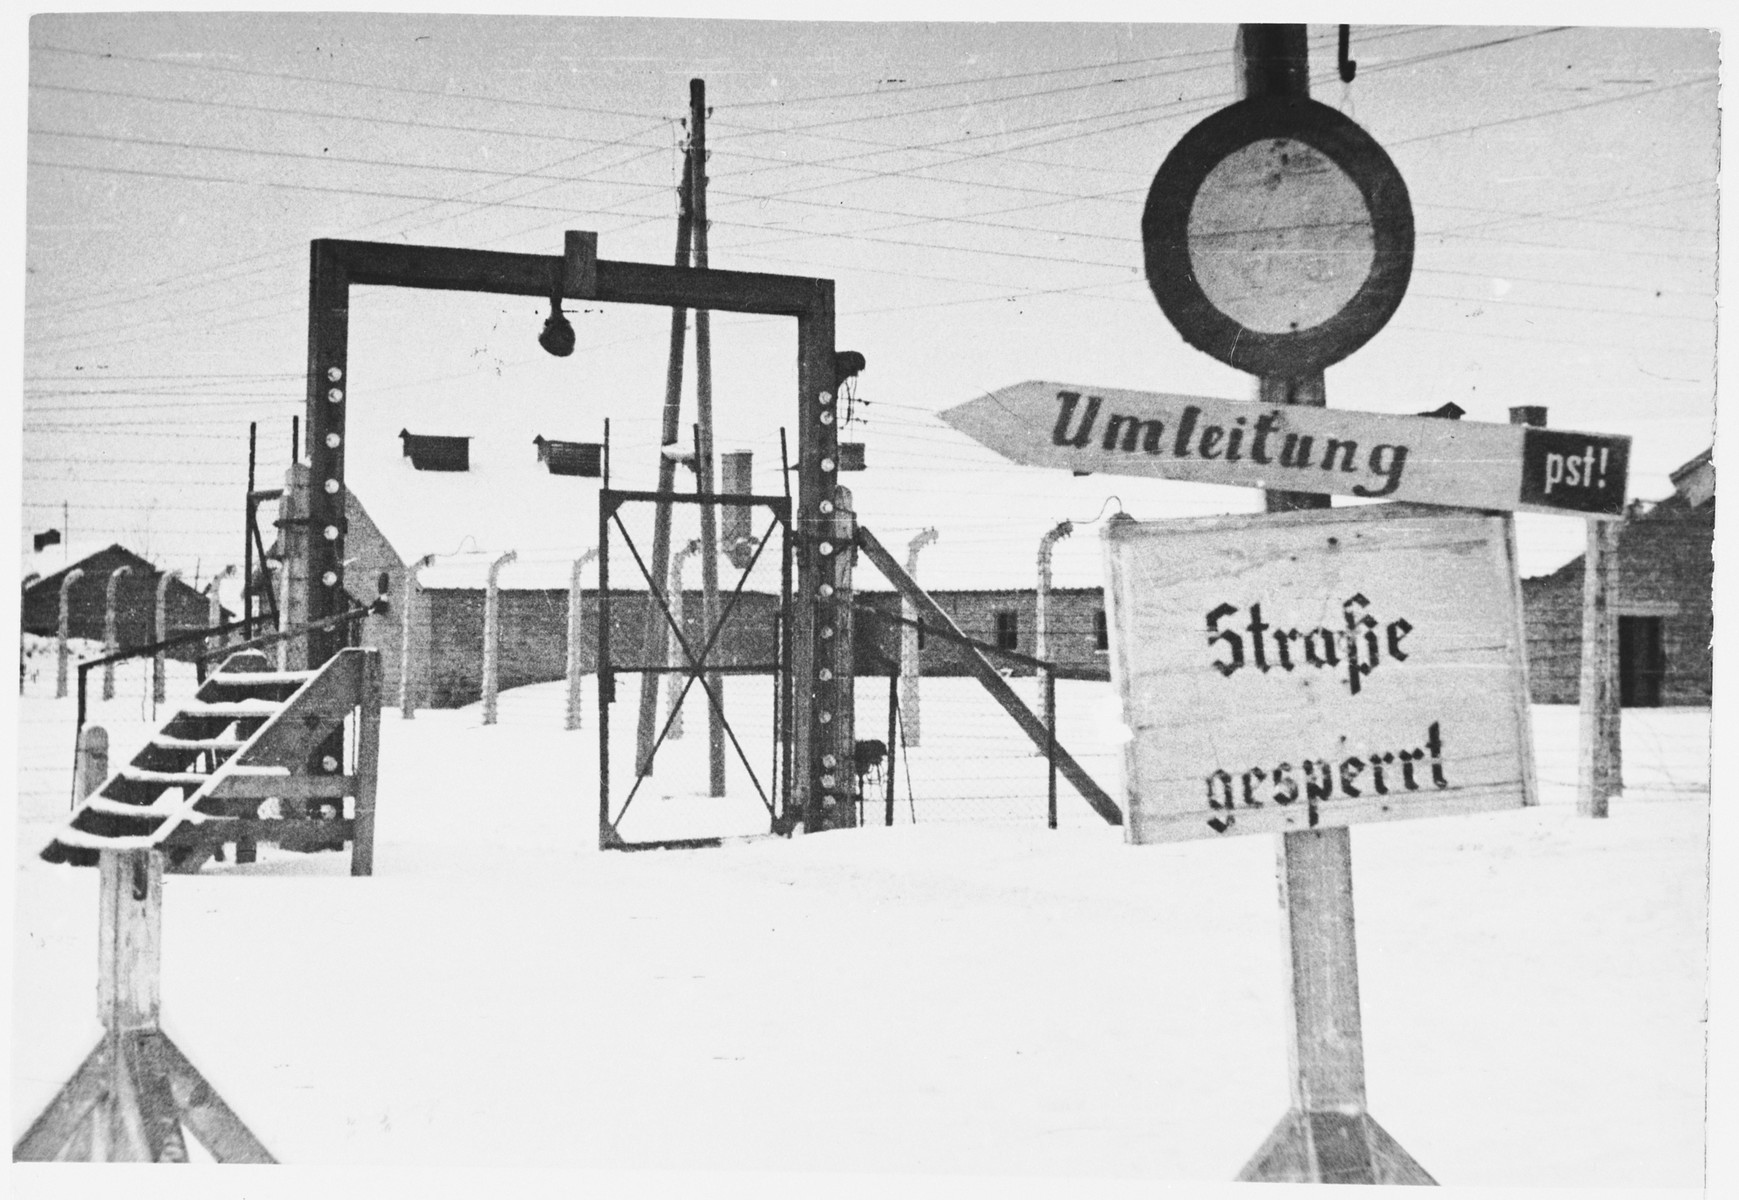 View of one of the gates in the electrified fence surrounding Auschwitz-Birkenau immediately after the liberation.

Original caption:  "One of the entrances in electrified fence."